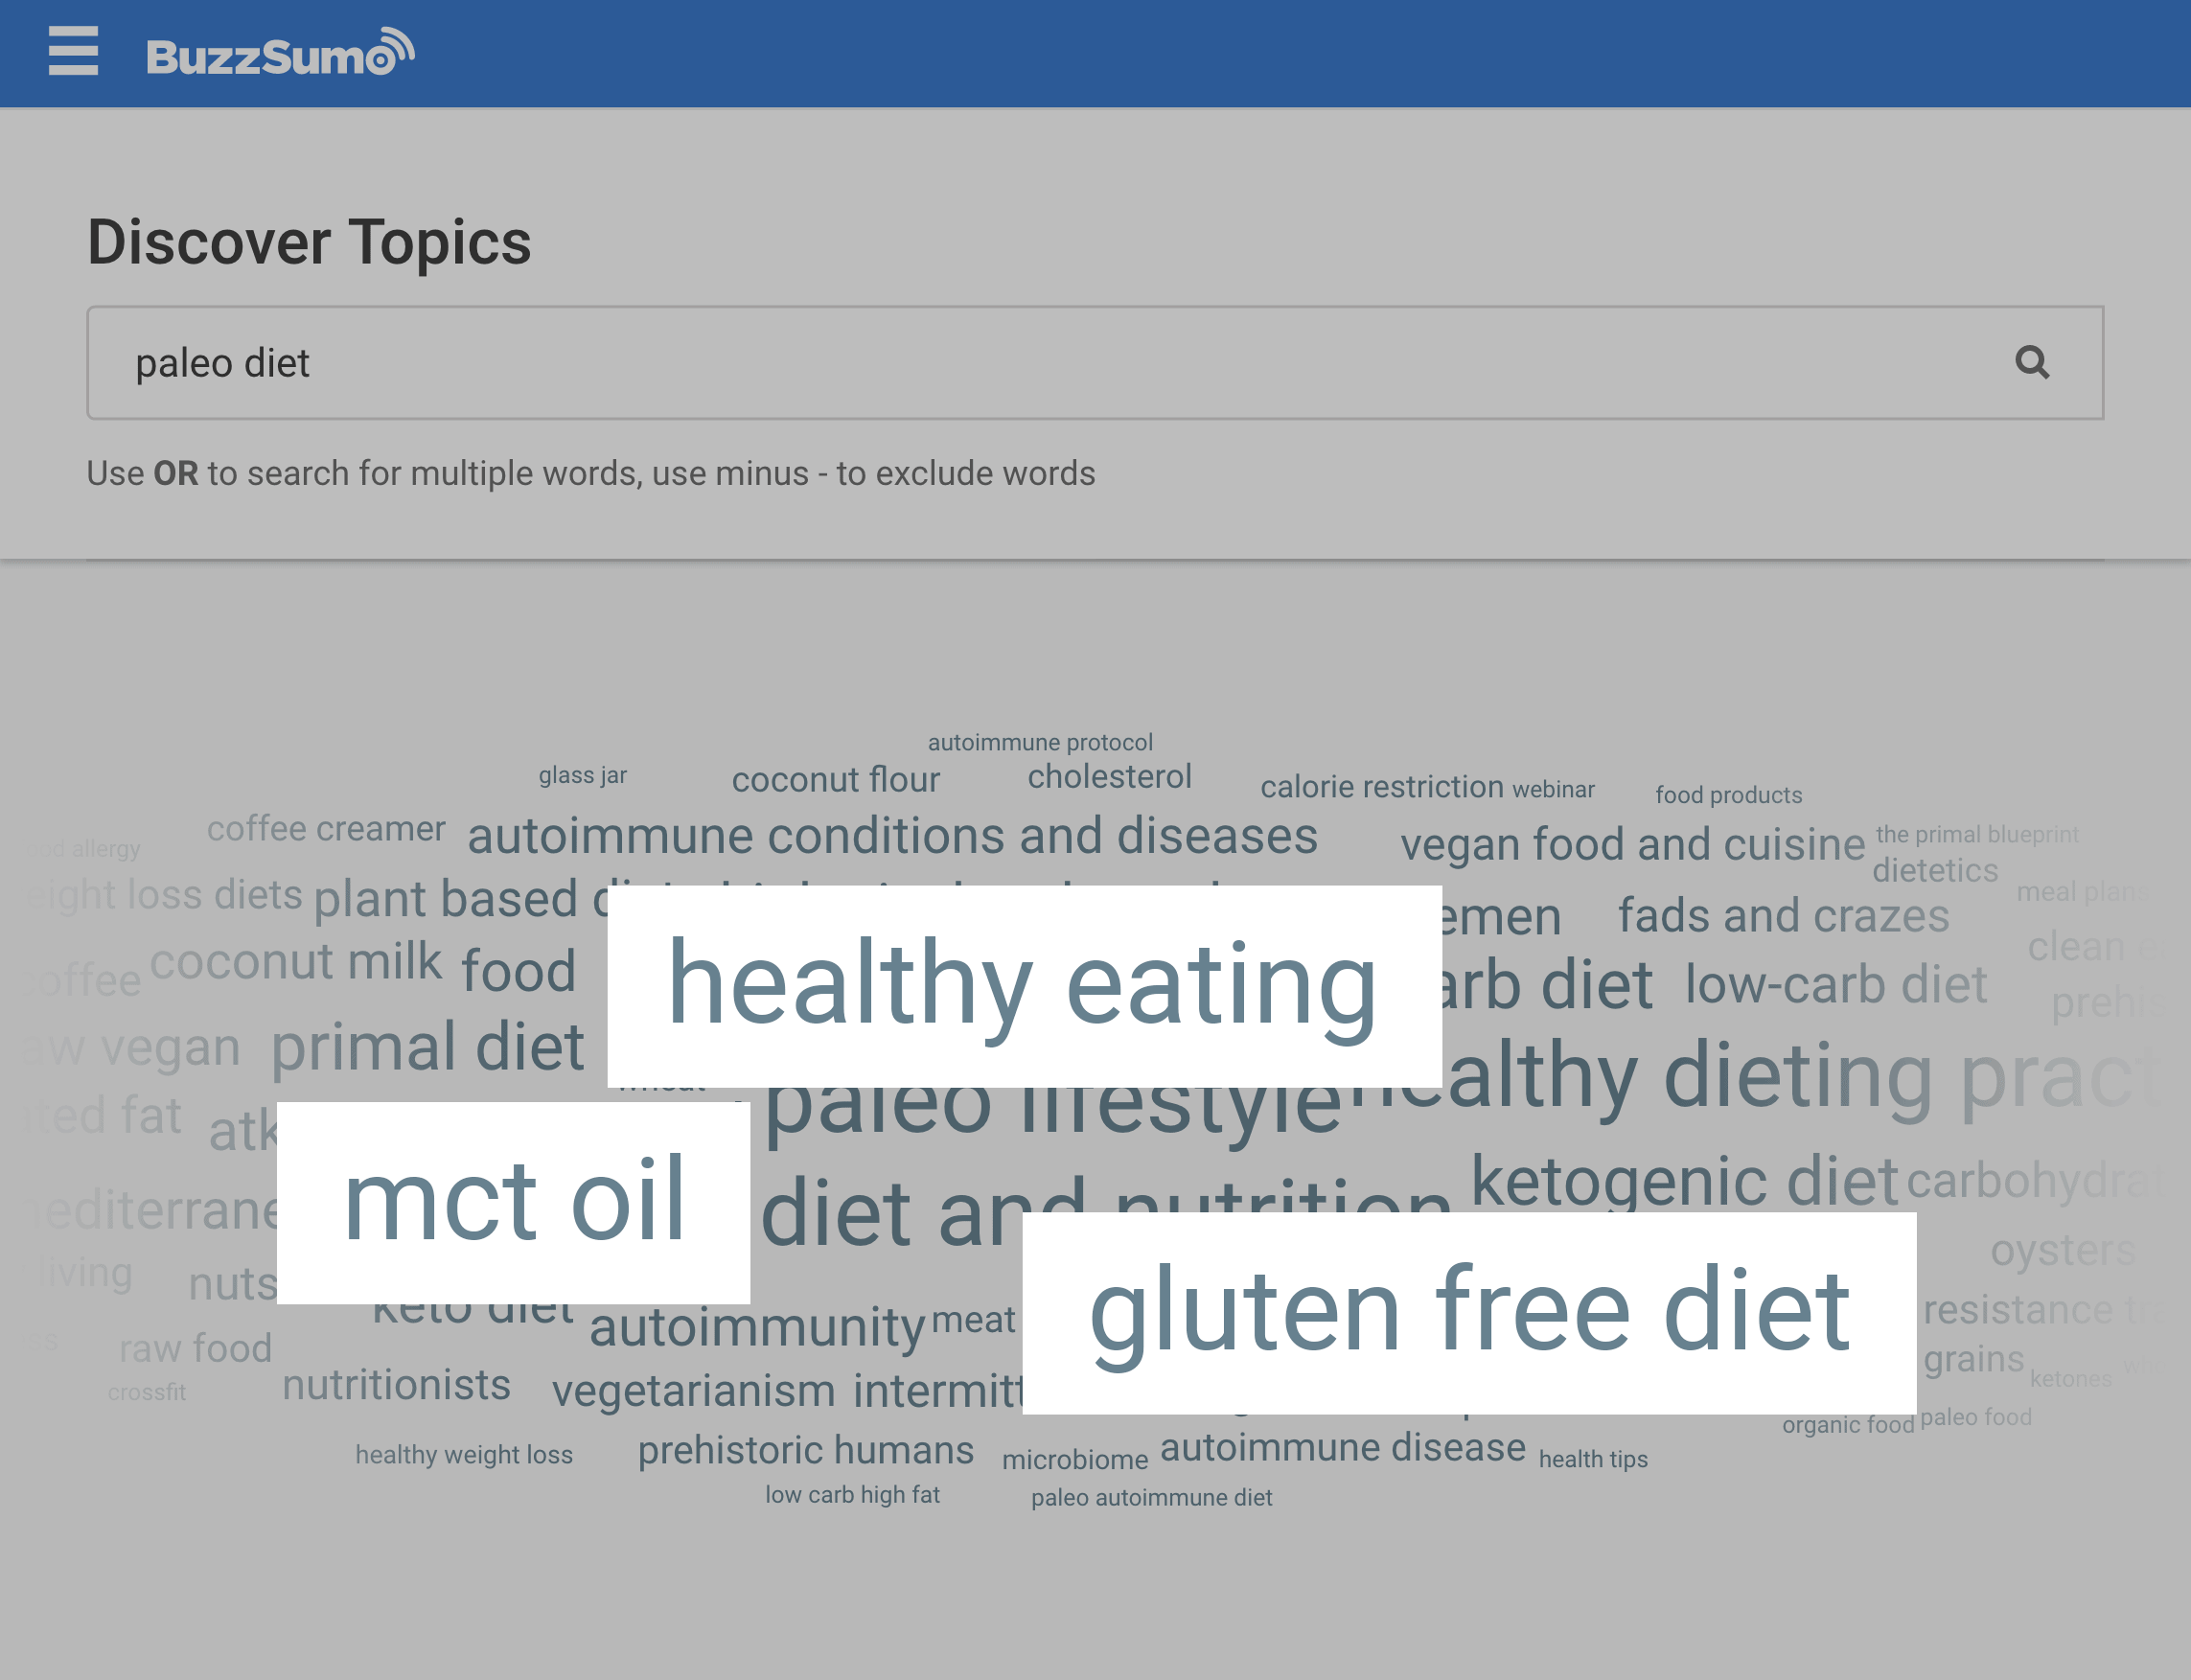 BuzzSumo – Paleo Diet Laterally Related Topic Ideas